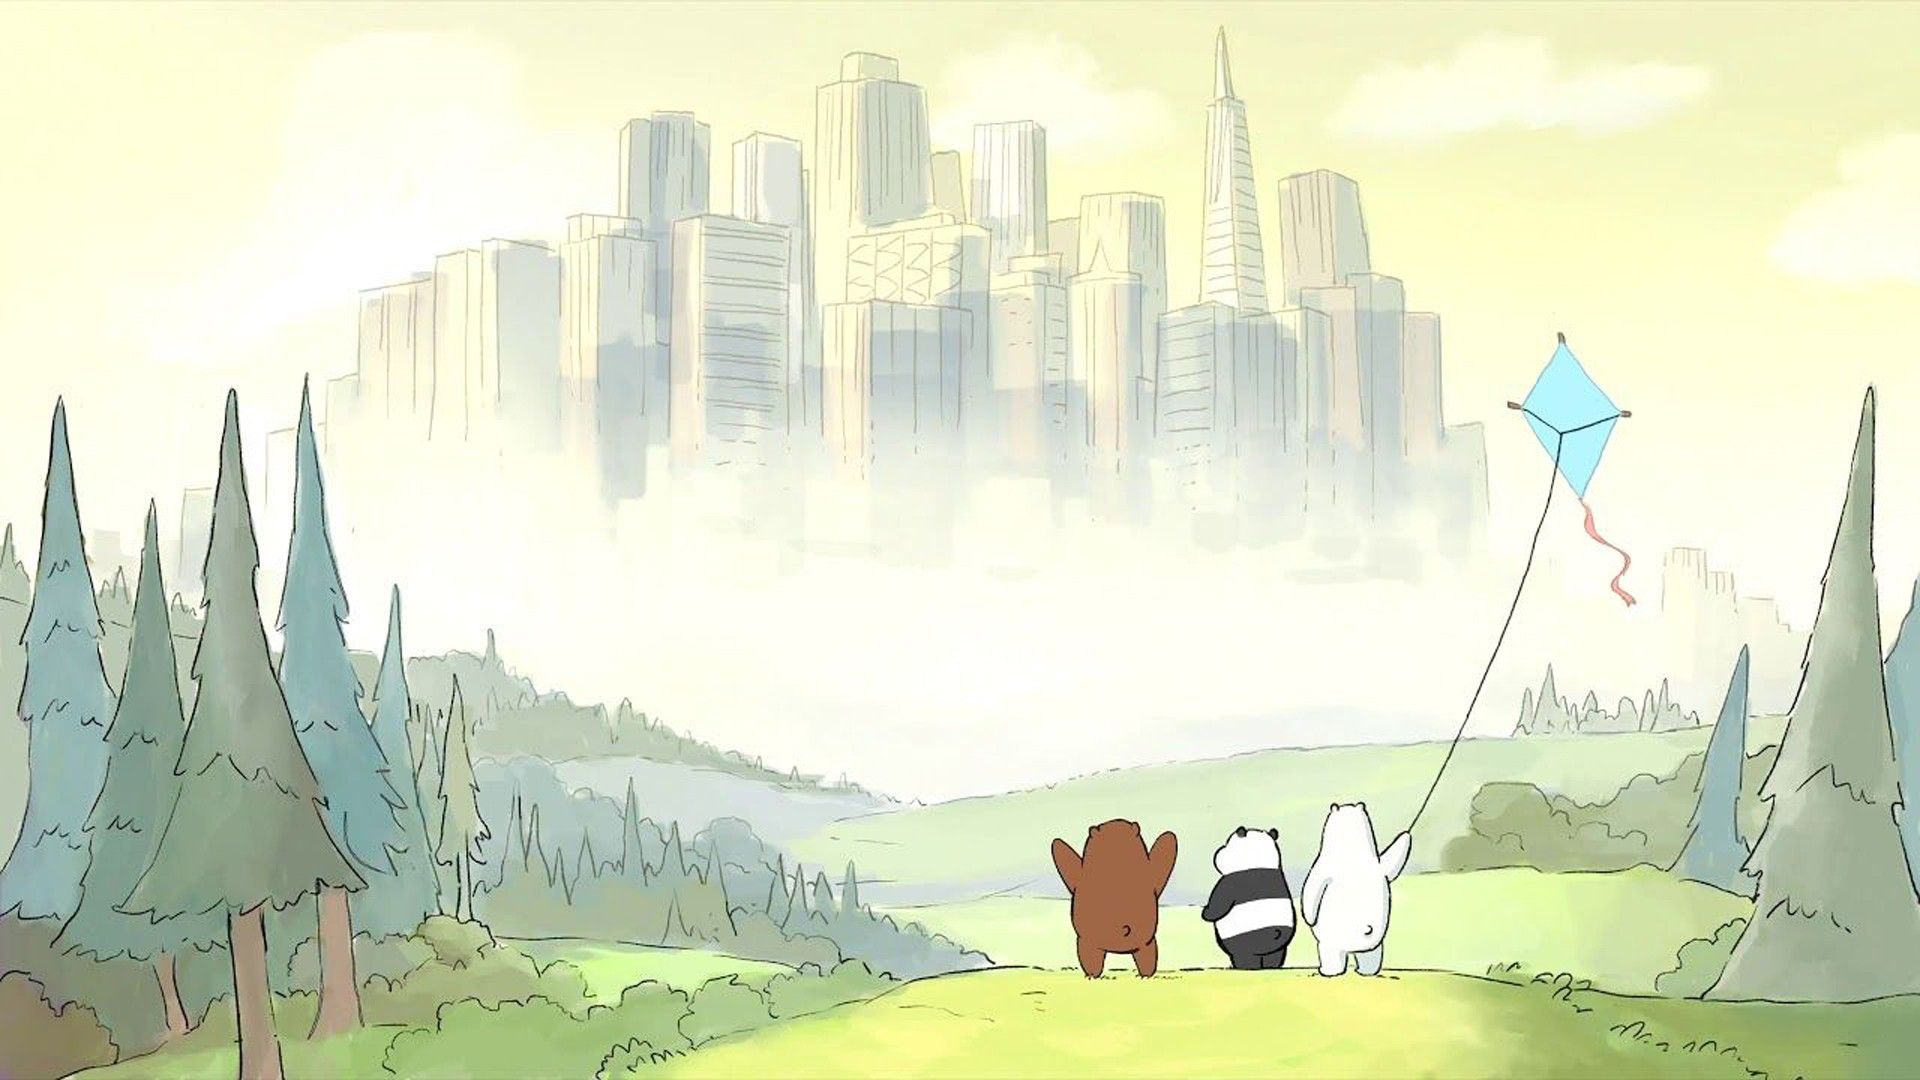 We bare bears wallpaper for computer backgrounds desktop backgrounds free download 1920x1080 - We Bare Bears